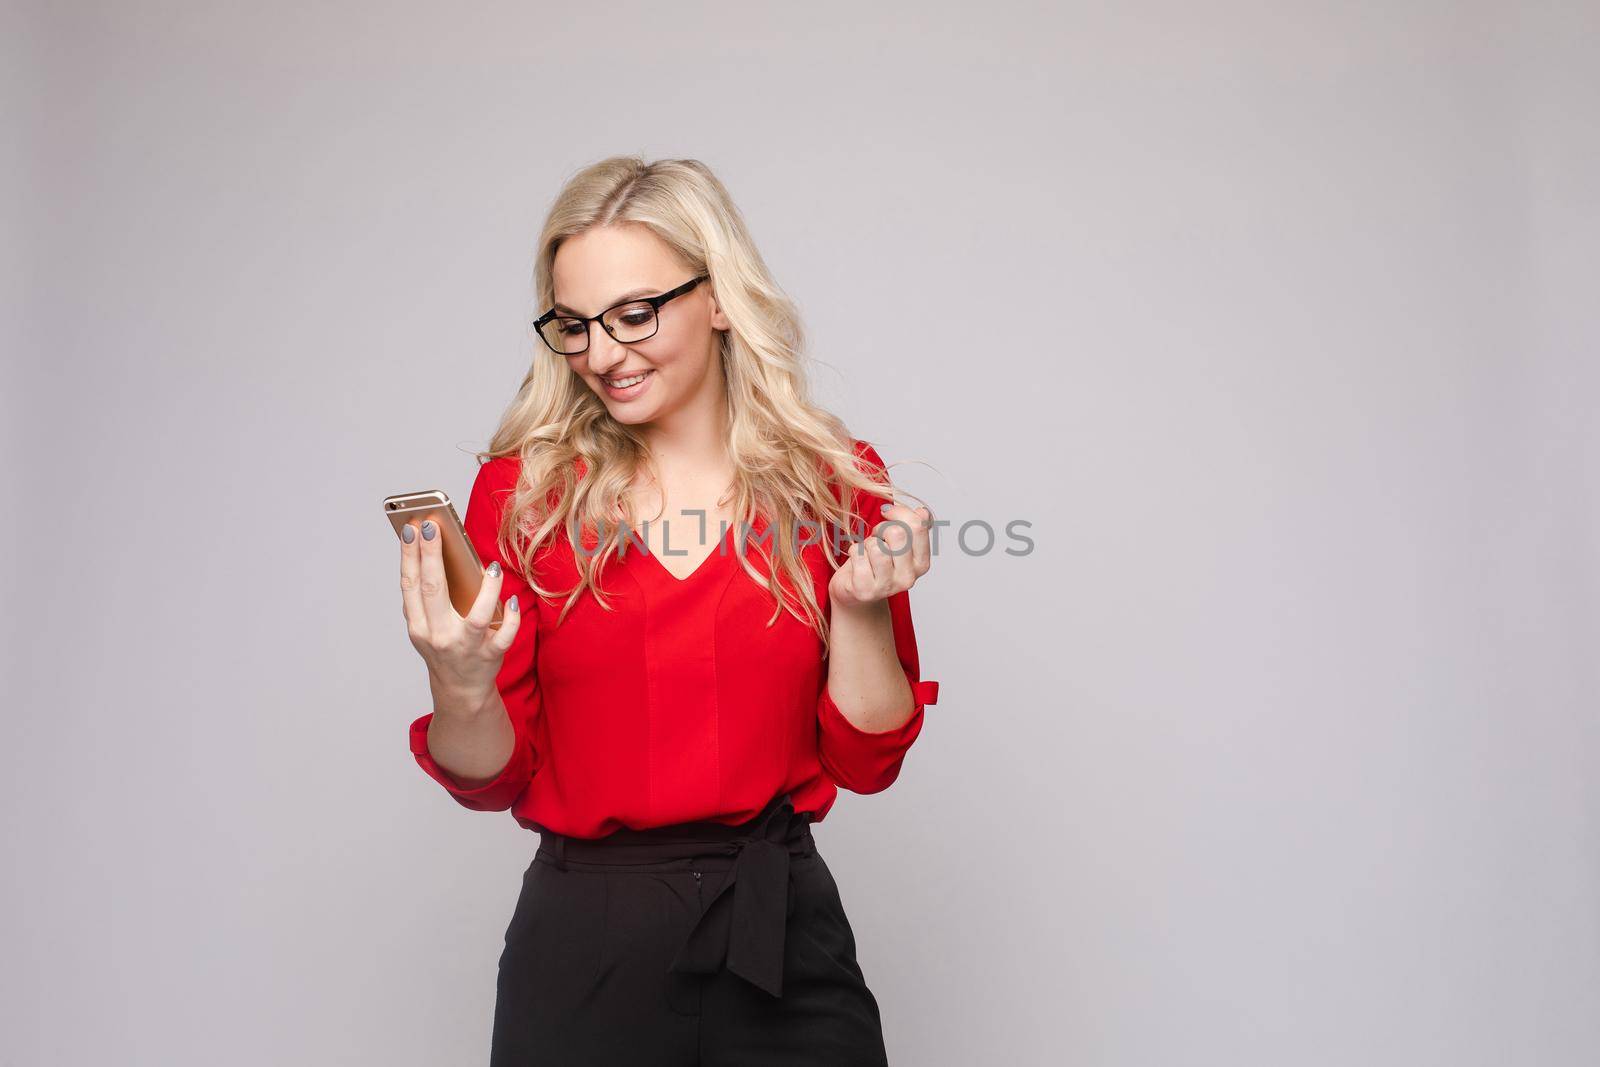 Woman in red blouse and skirt keeping phone and laughing by StudioLucky